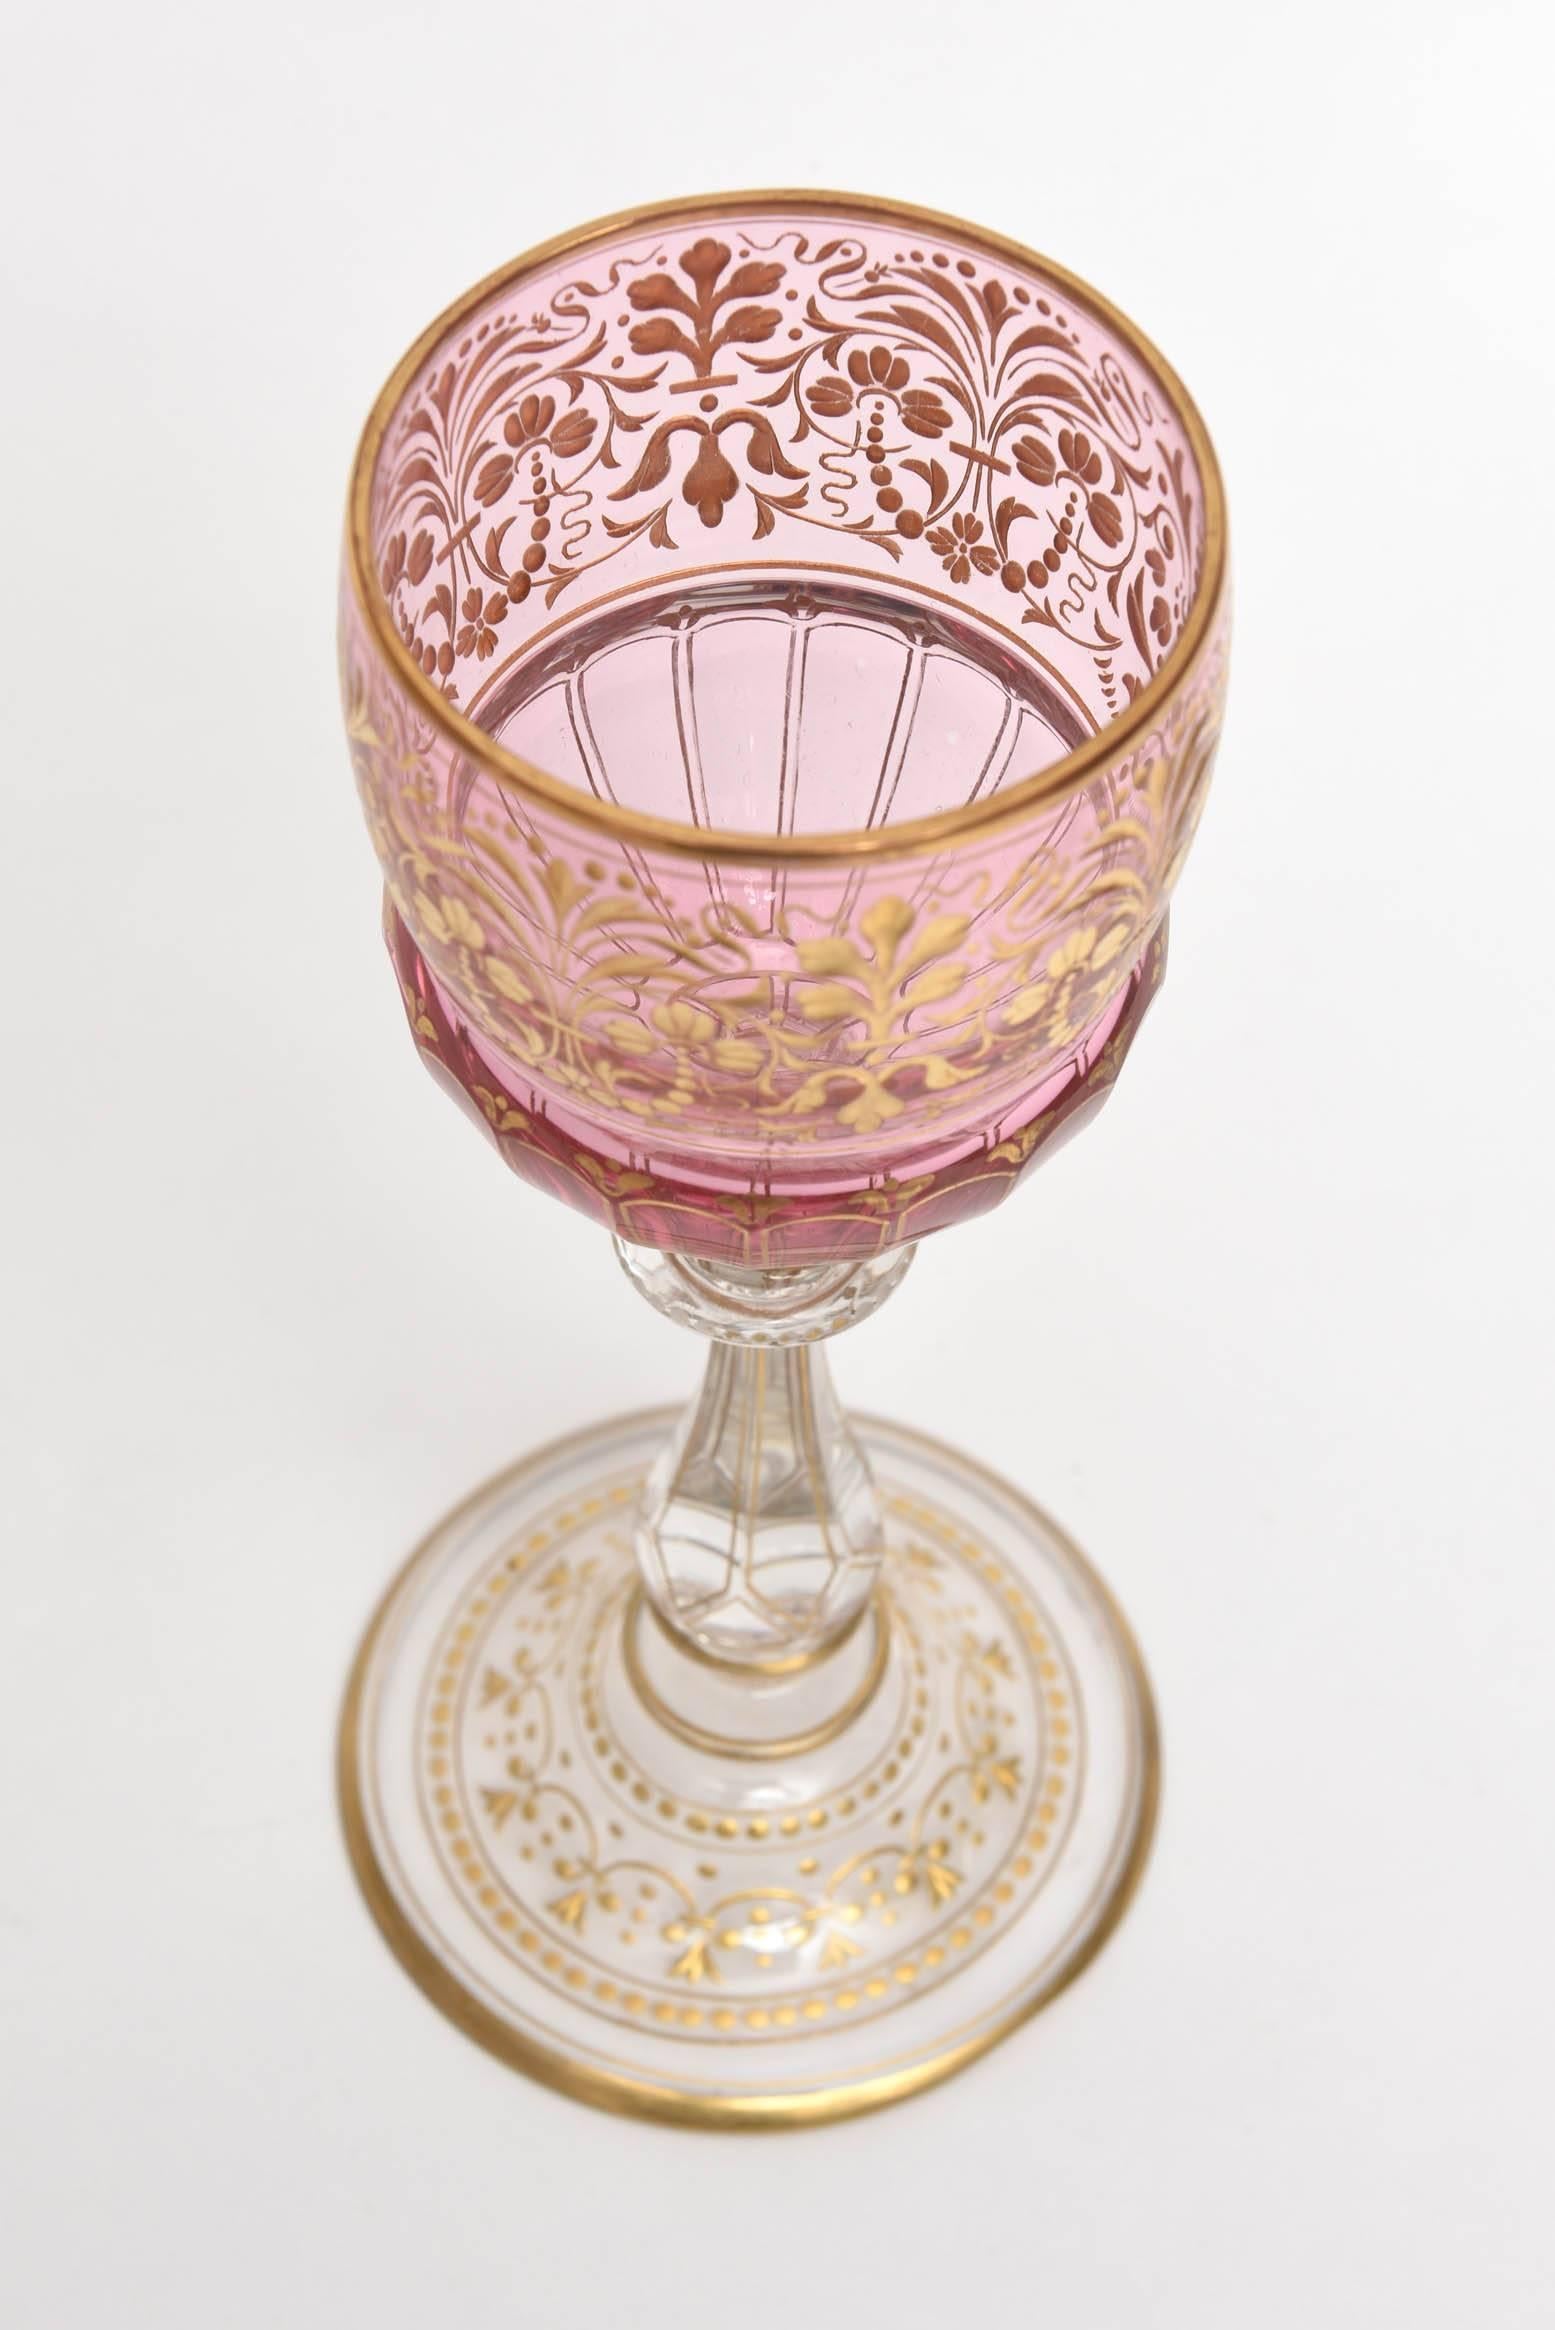 8 Elaborate Gilt and Ruby Pink Wine Goblets with Beautiful Stem 1